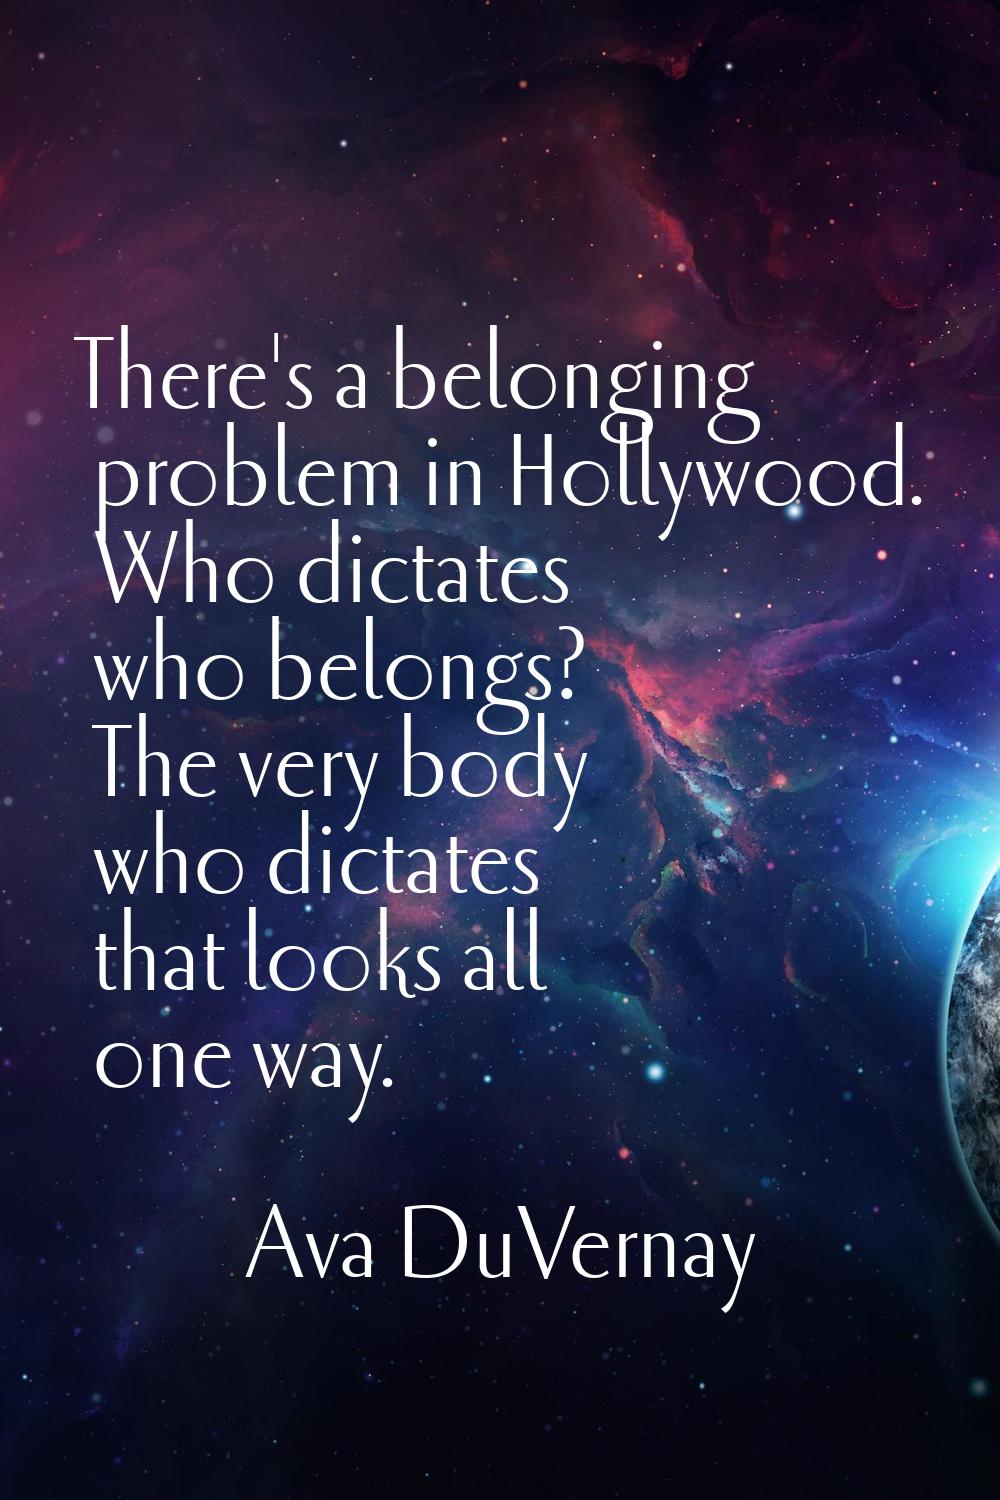 There's a belonging problem in Hollywood. Who dictates who belongs? The very body who dictates that